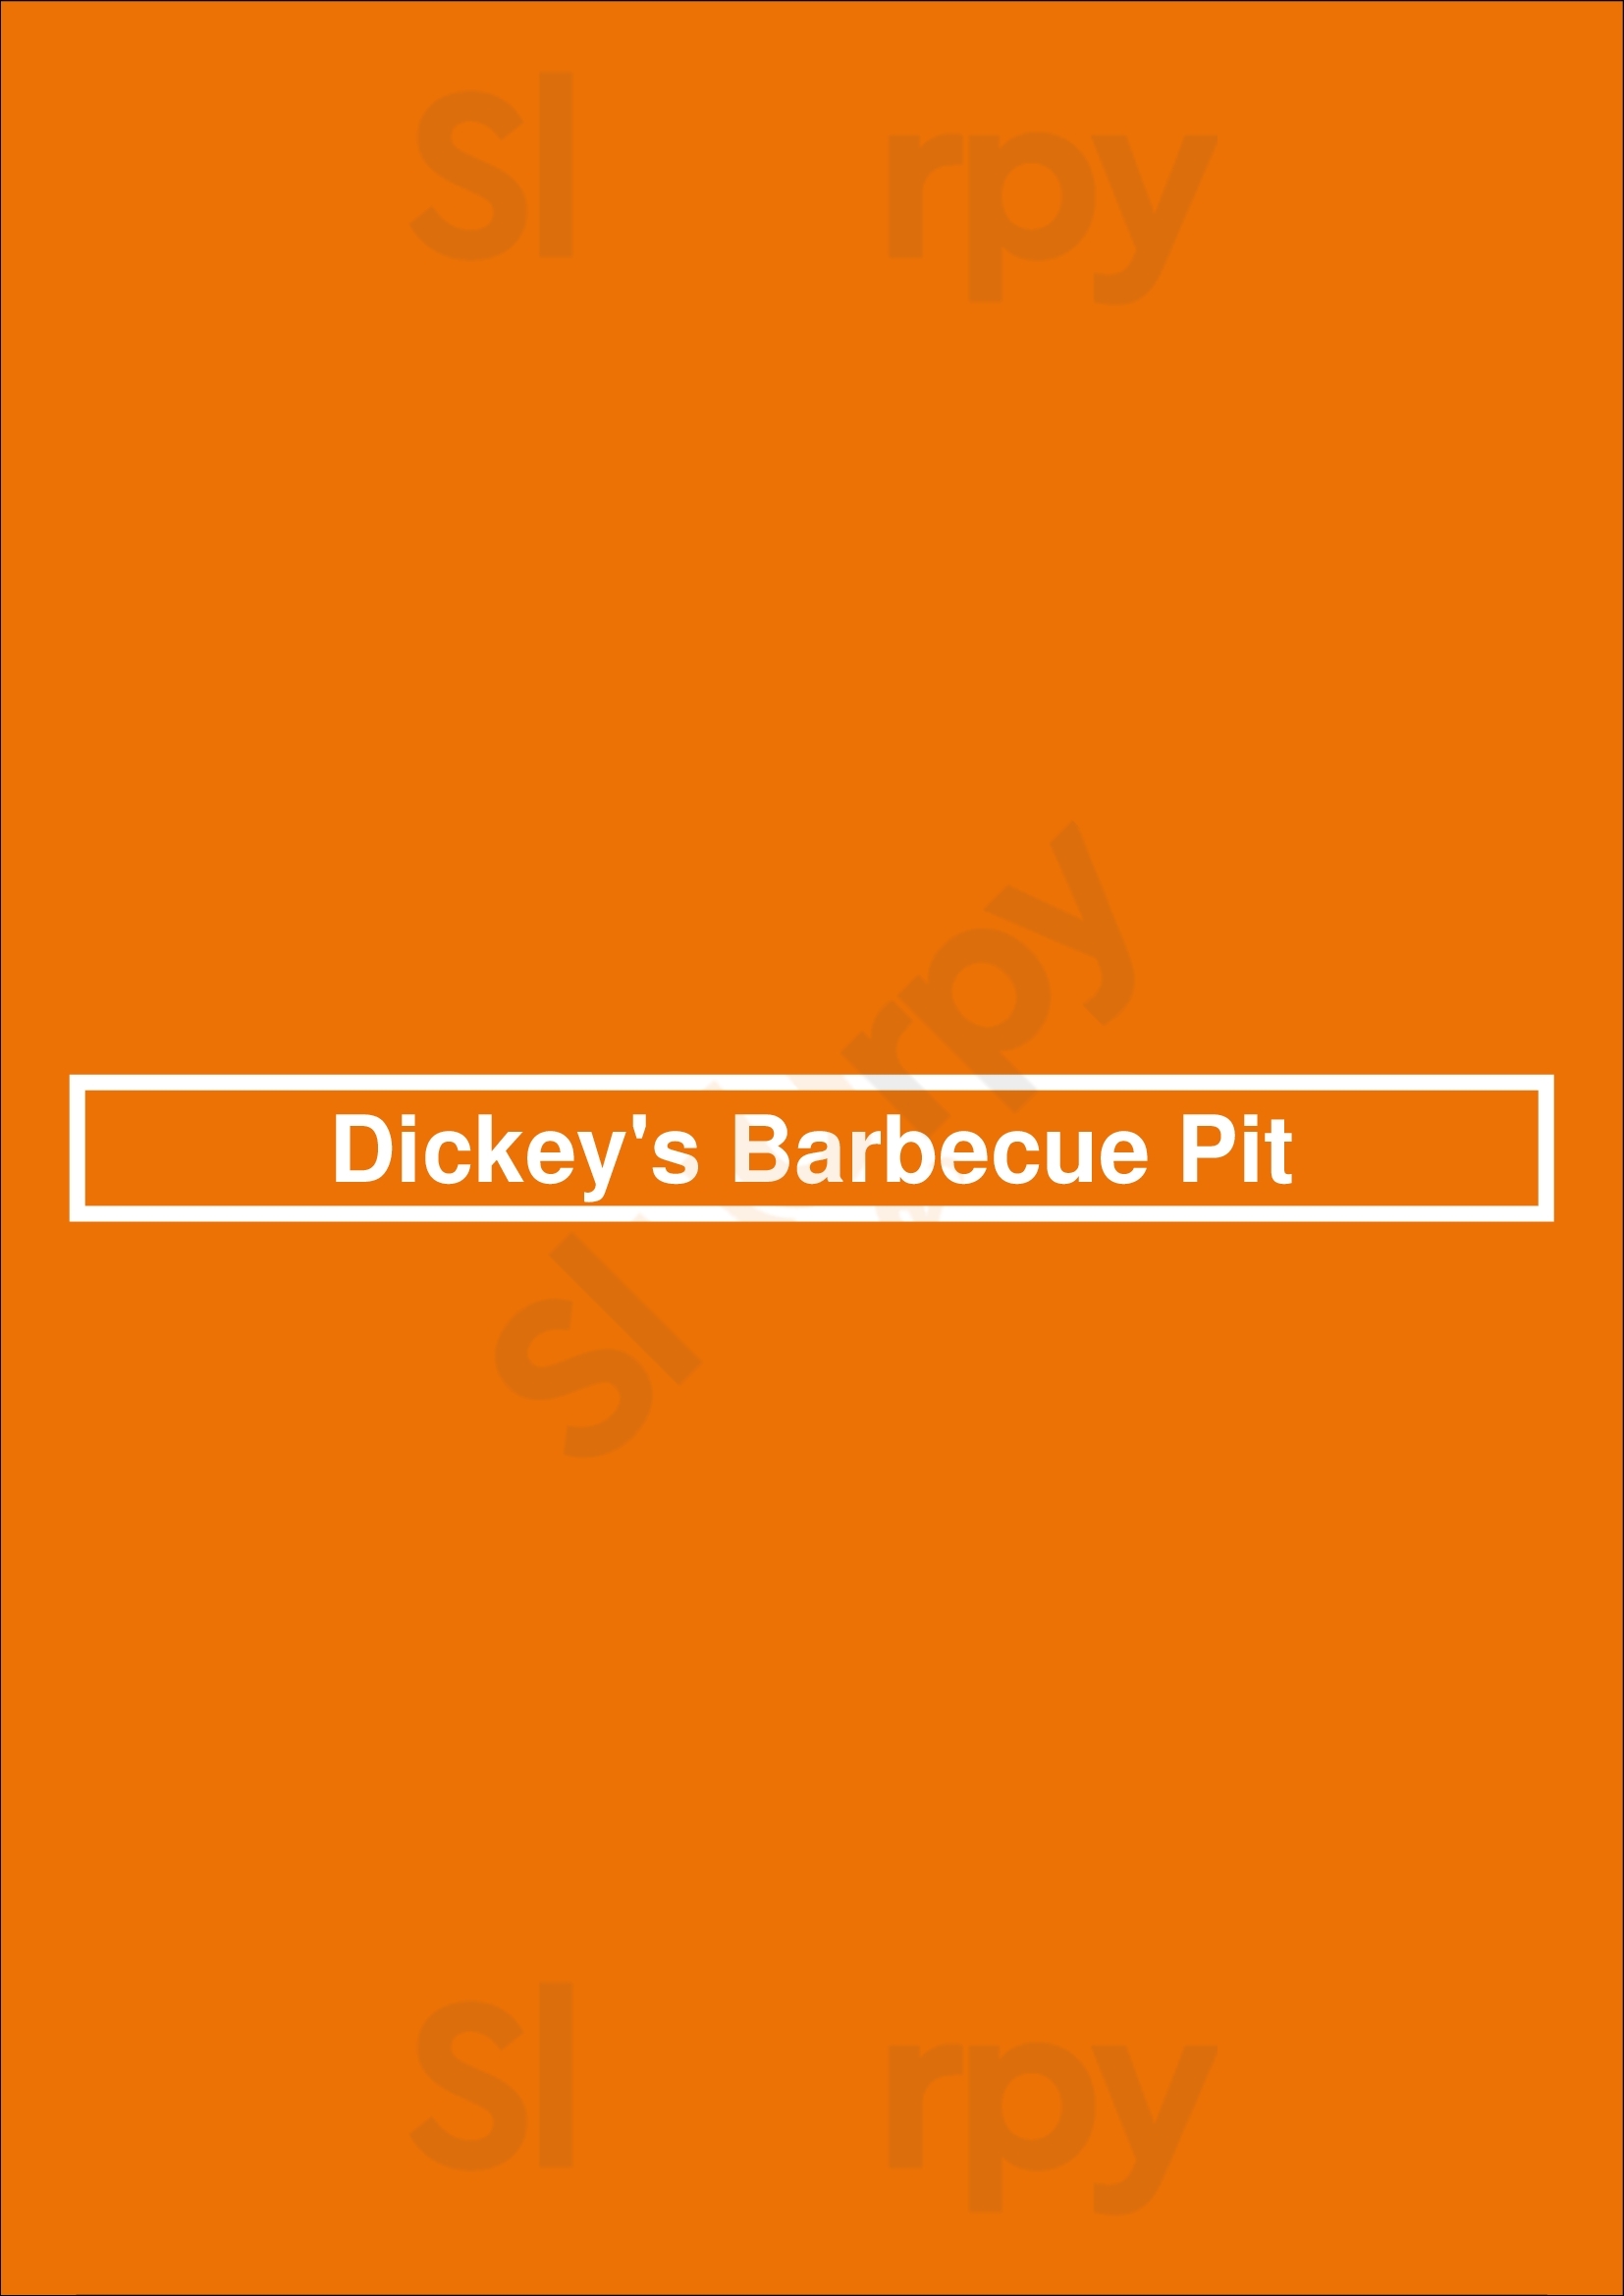 Dickey's Barbecue Pit Bedford Menu - 1